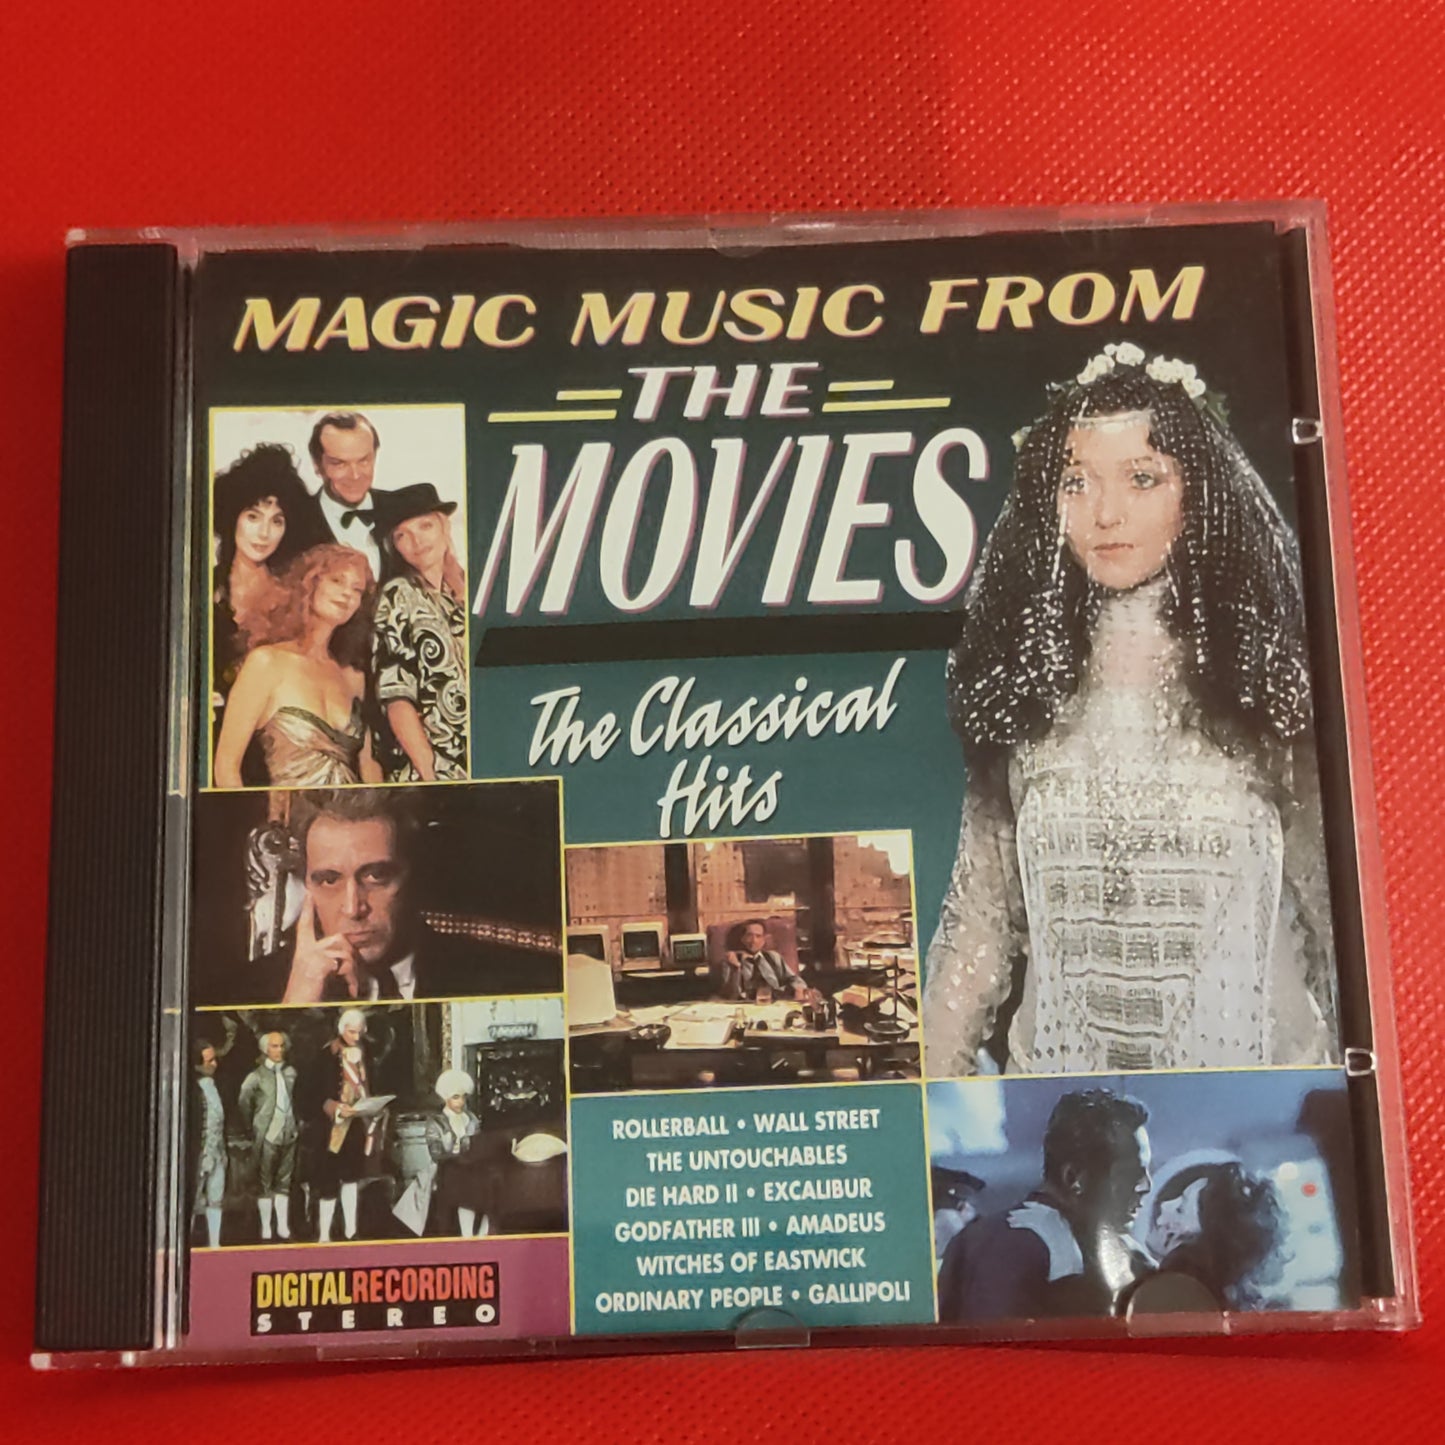 Magic Music from the movies The Classical Hits